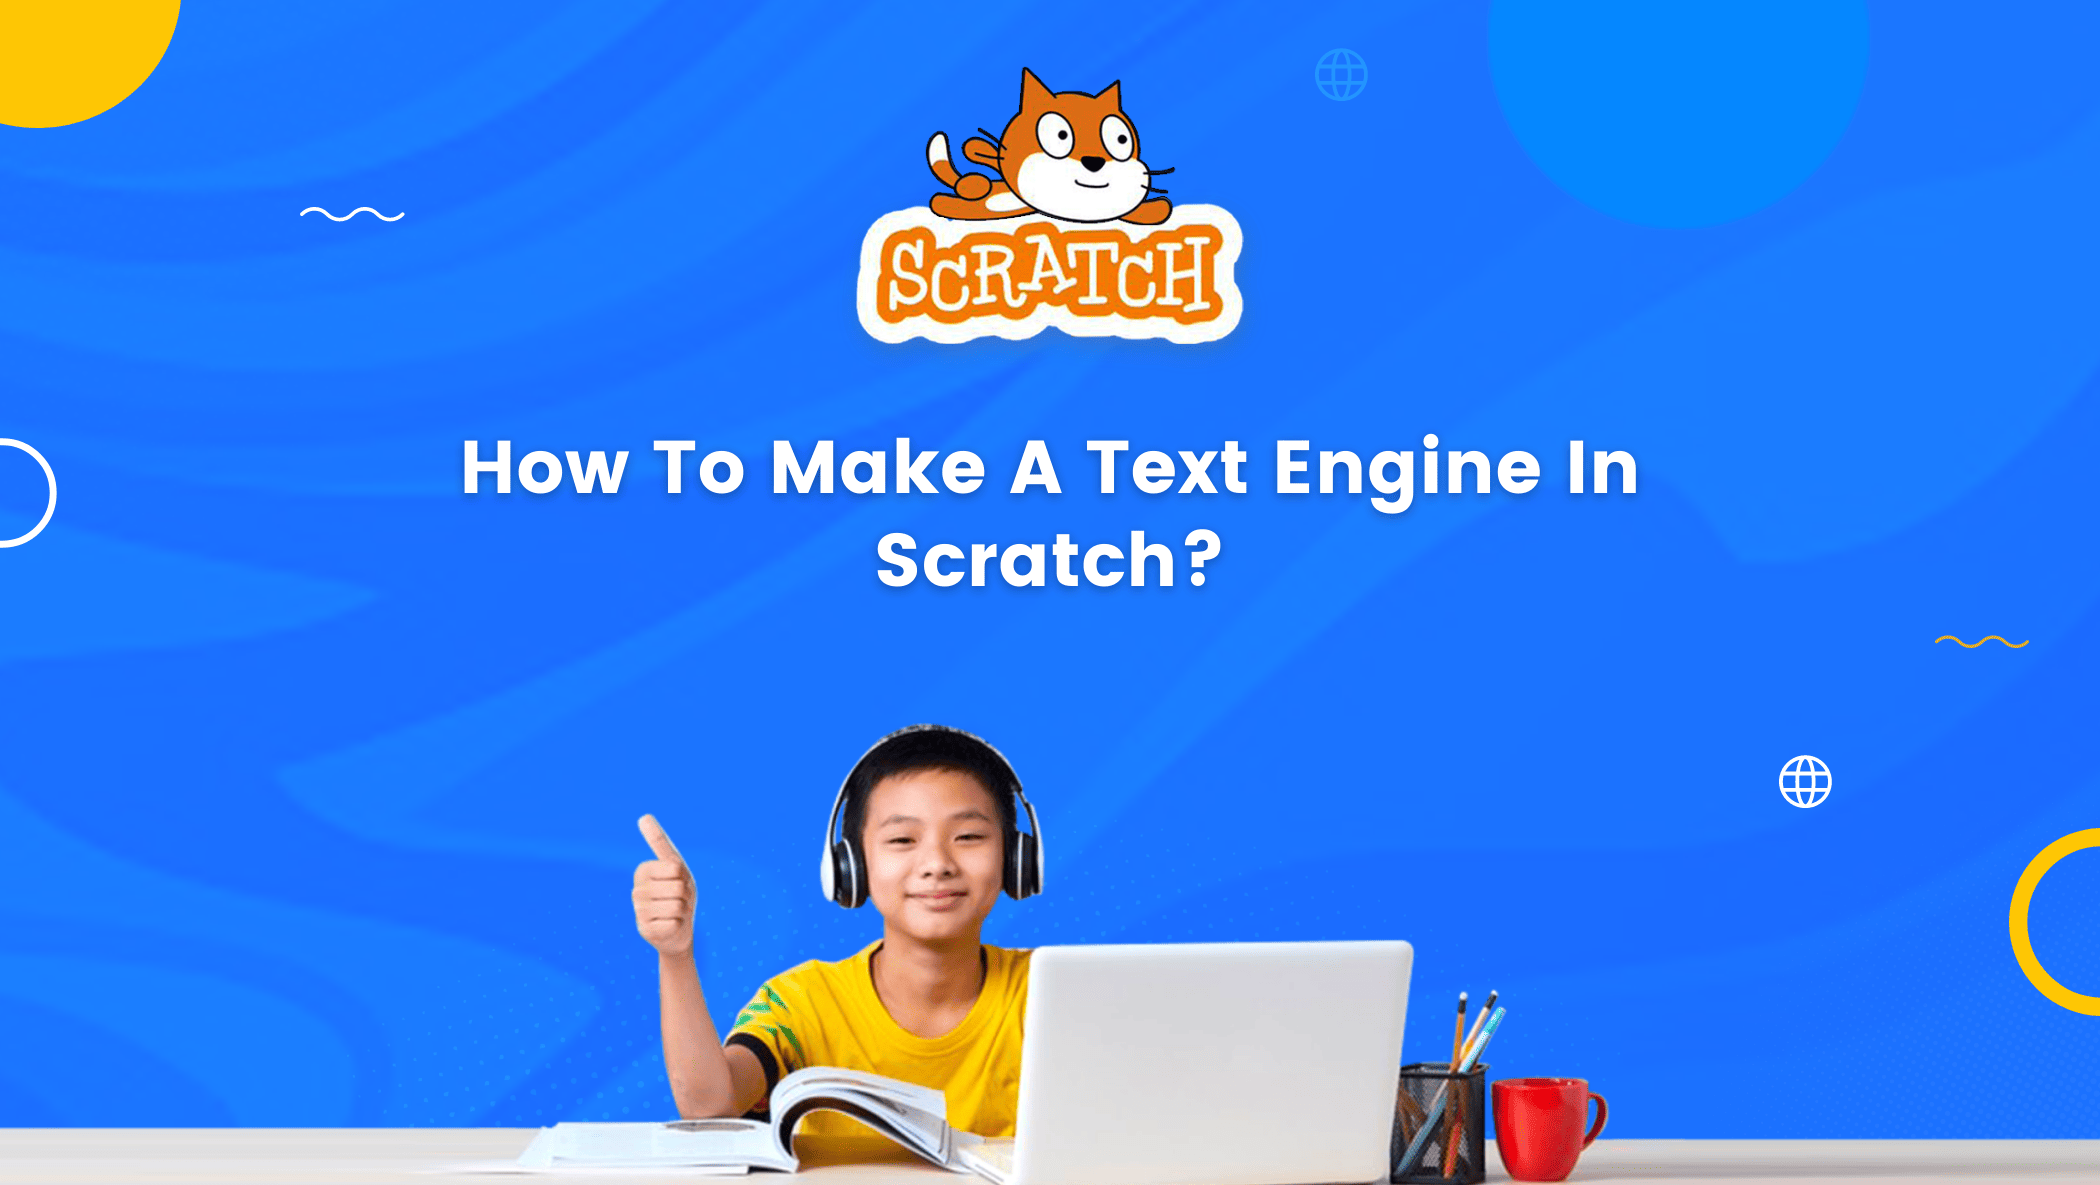 How To Make A Text Engine In Scratch